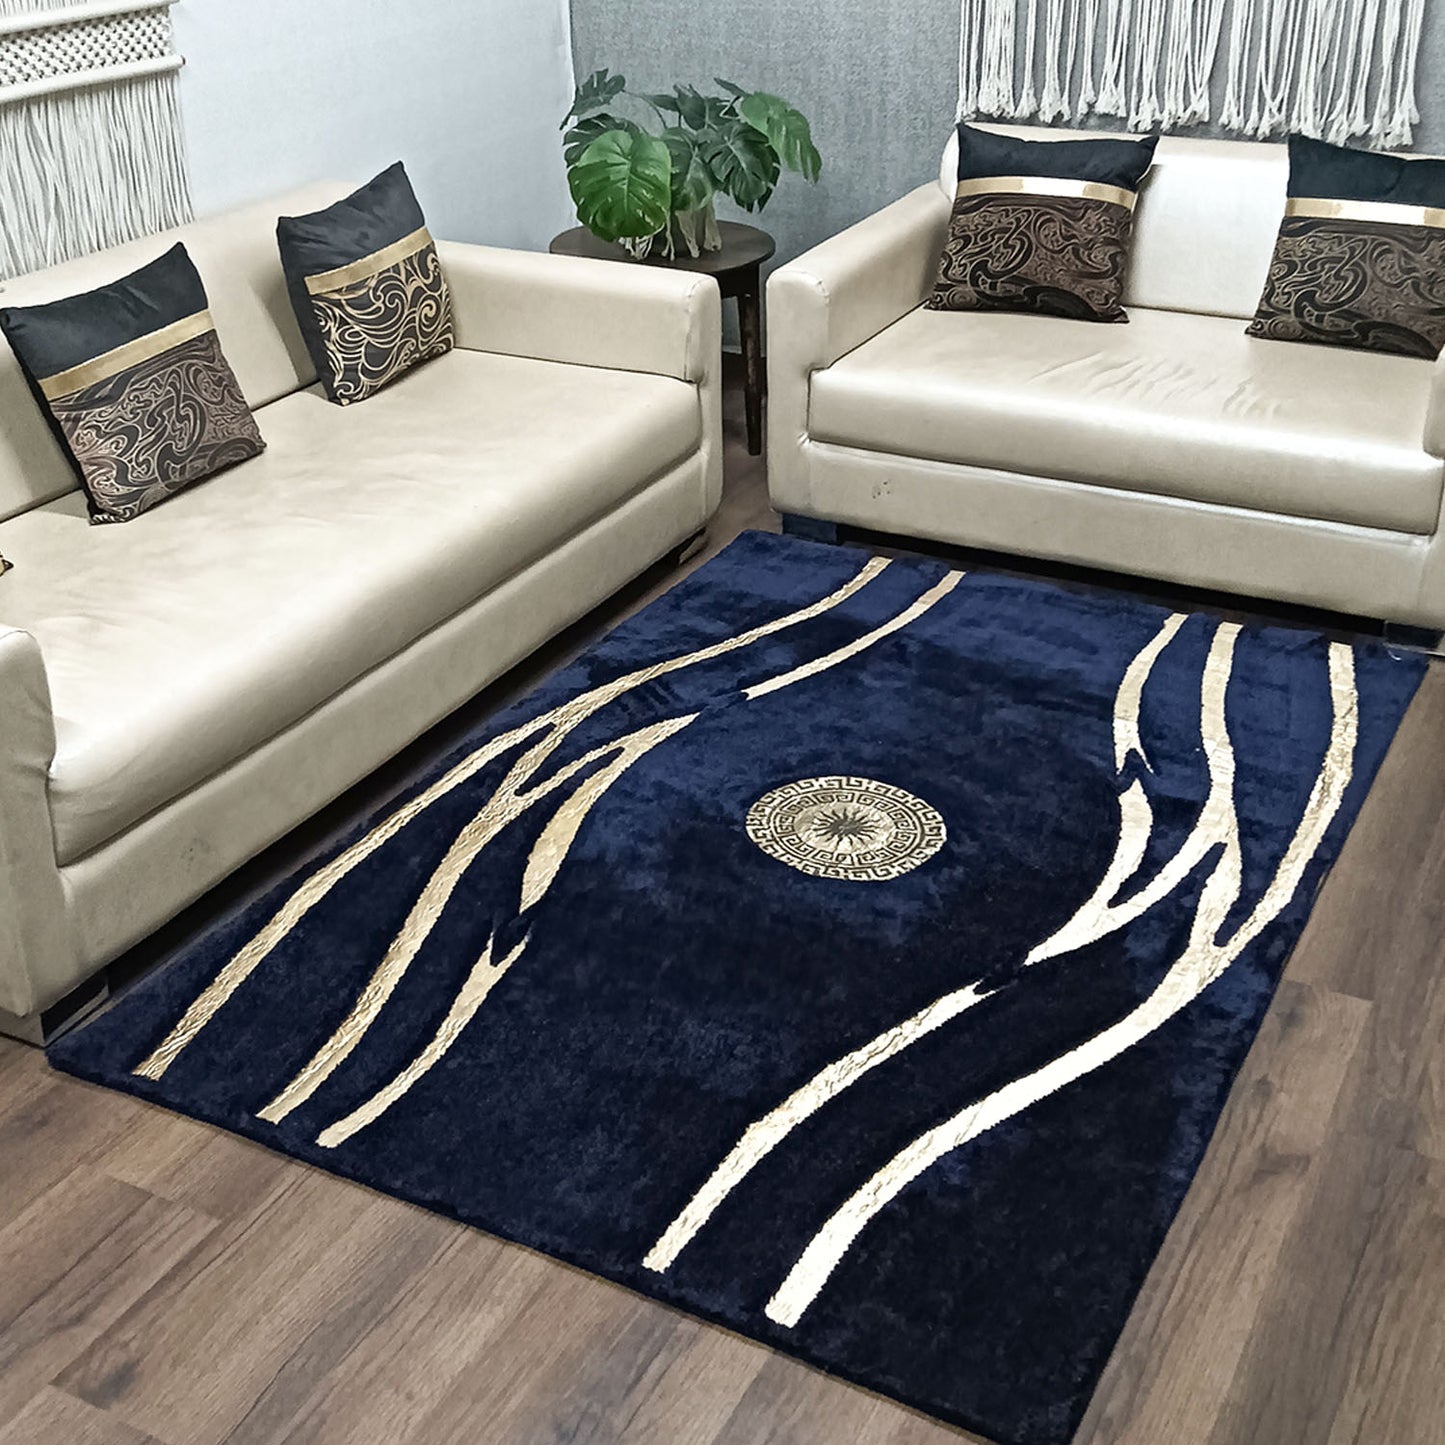 Avioni Divine Collection | Luxury Golden Touch With Blue Cross Design Soft And Plush Handmade Living Room Rugs | Different Sizes | Carpet for Living Room